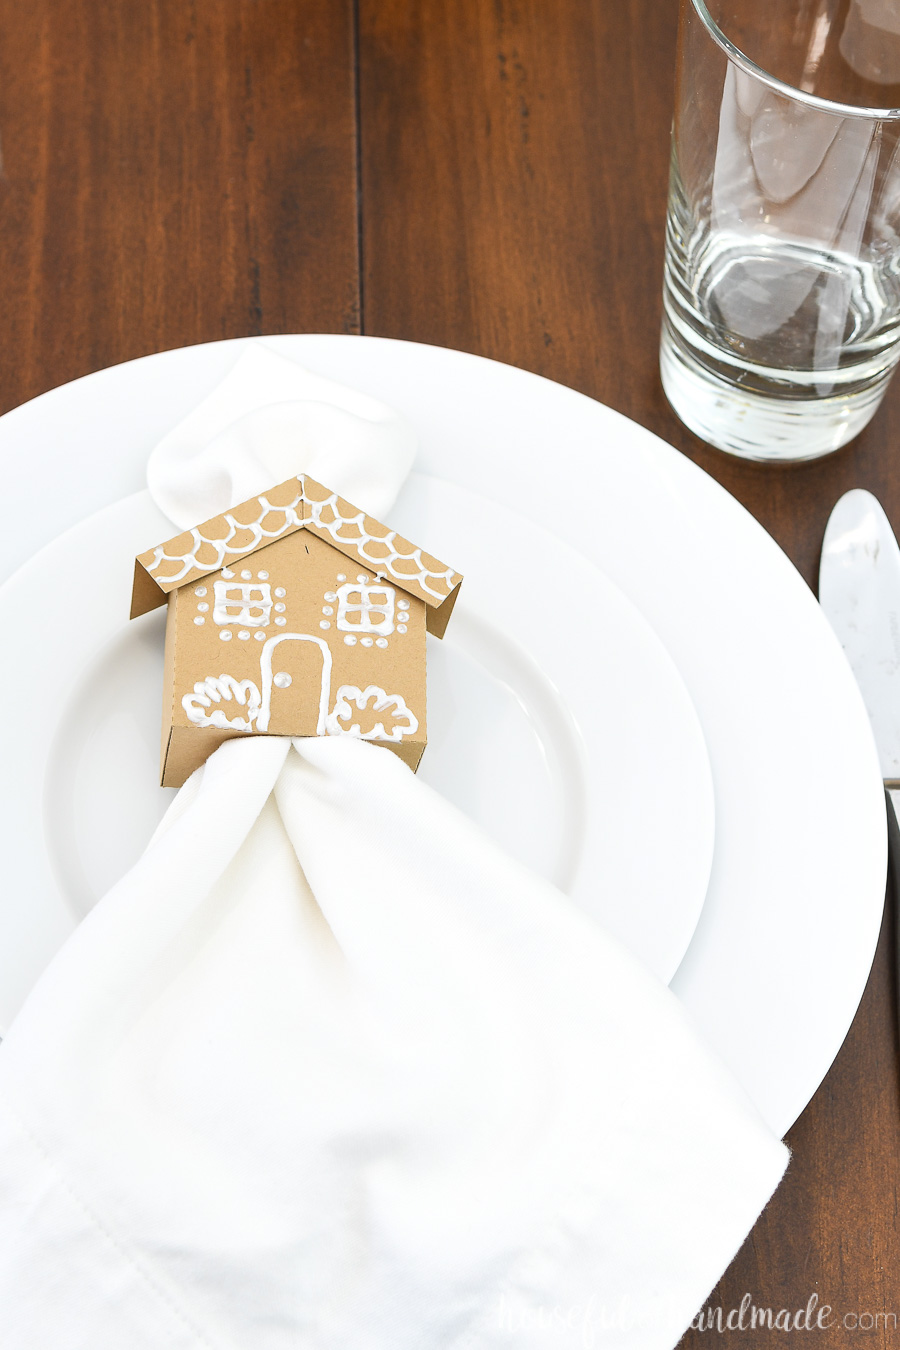 Close up of the paper gingerbread house napkin ring with a white fabric napkin inside sitting on a place setting.